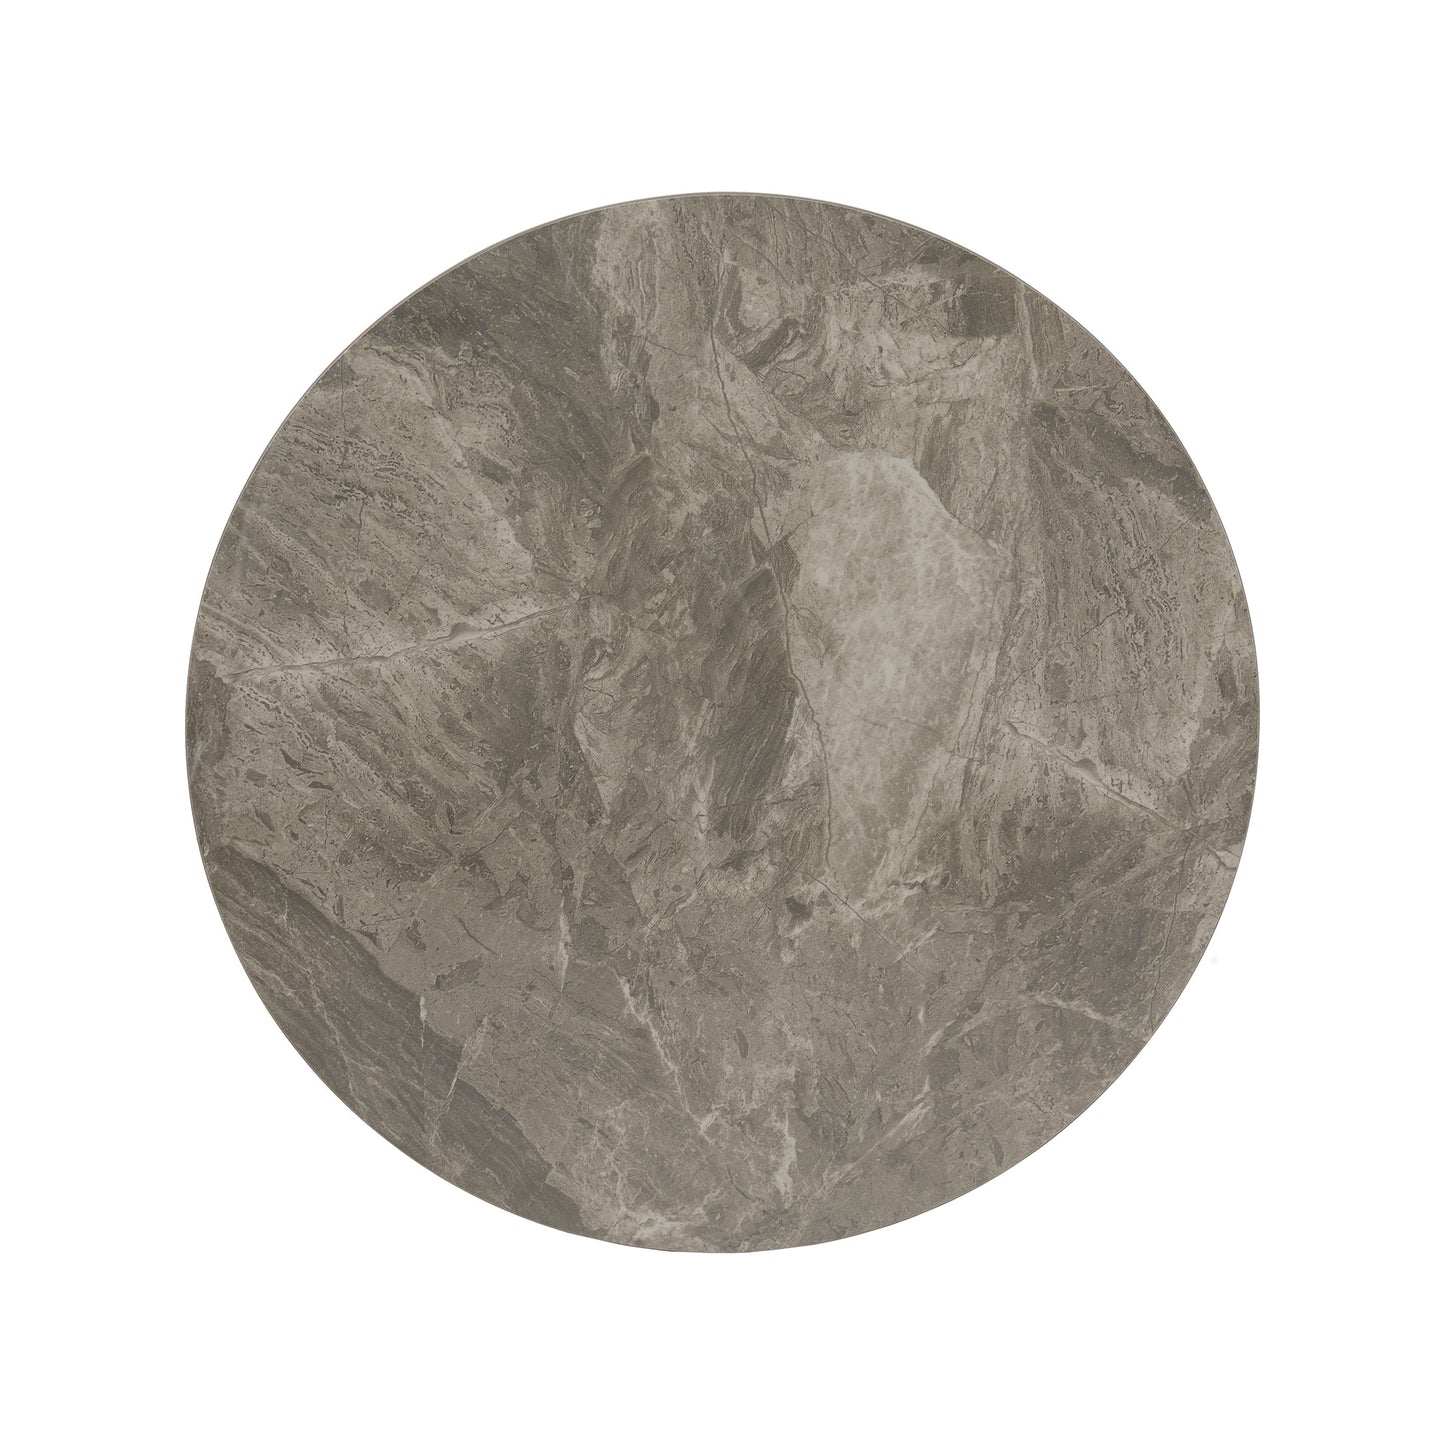 Glossy Sintered Stone with Grey Metal Base Table - Grey Top